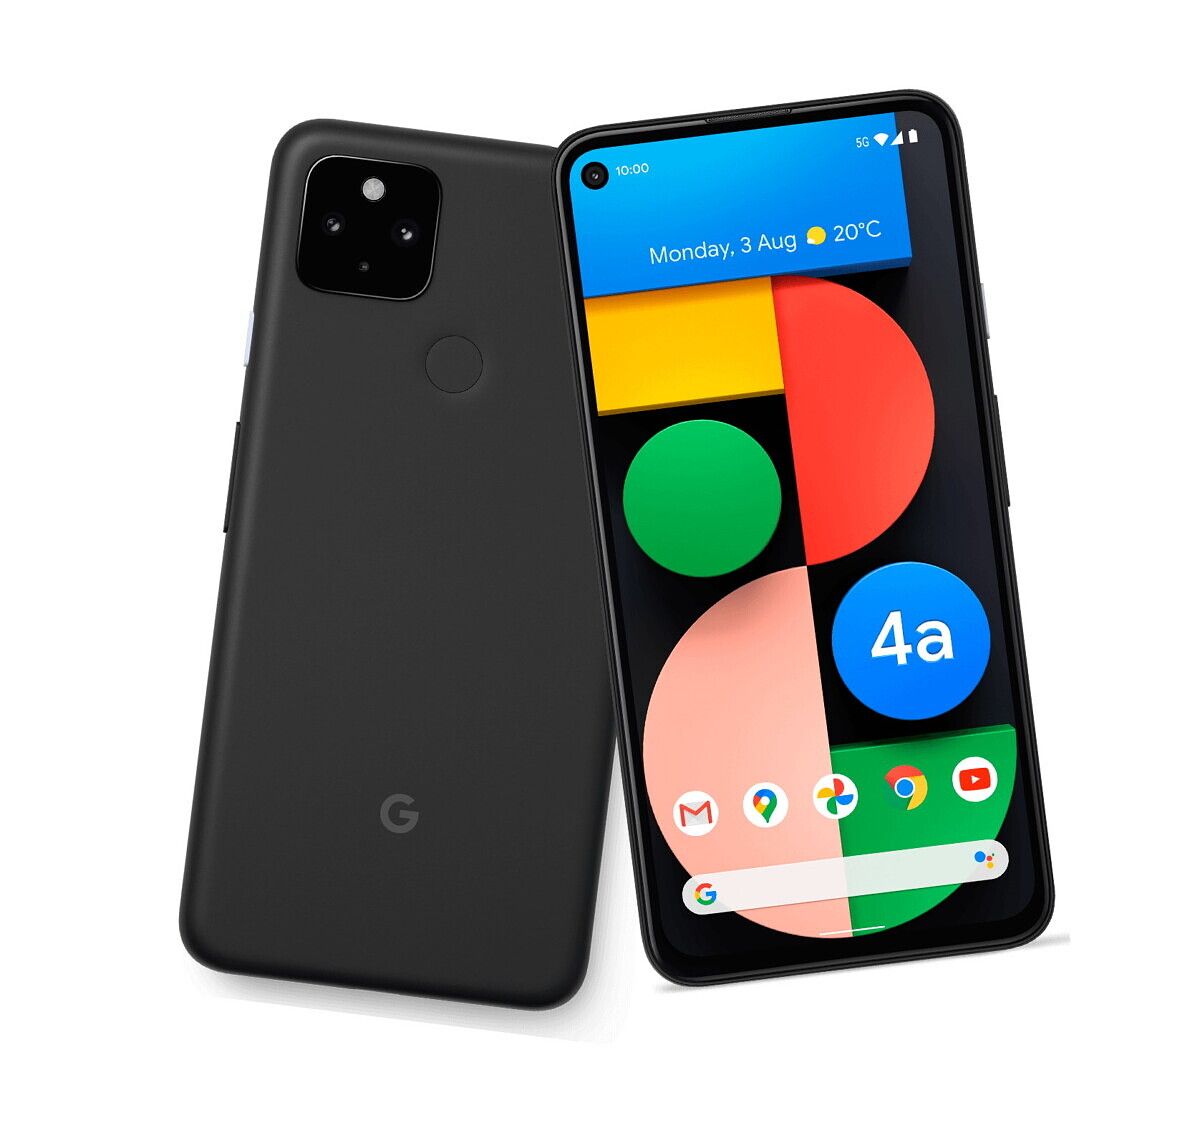 While the phone is out of stock at most places, Amazon has the US variant in stock but we would still recommend the Pixel 5a (5G) over this phone.